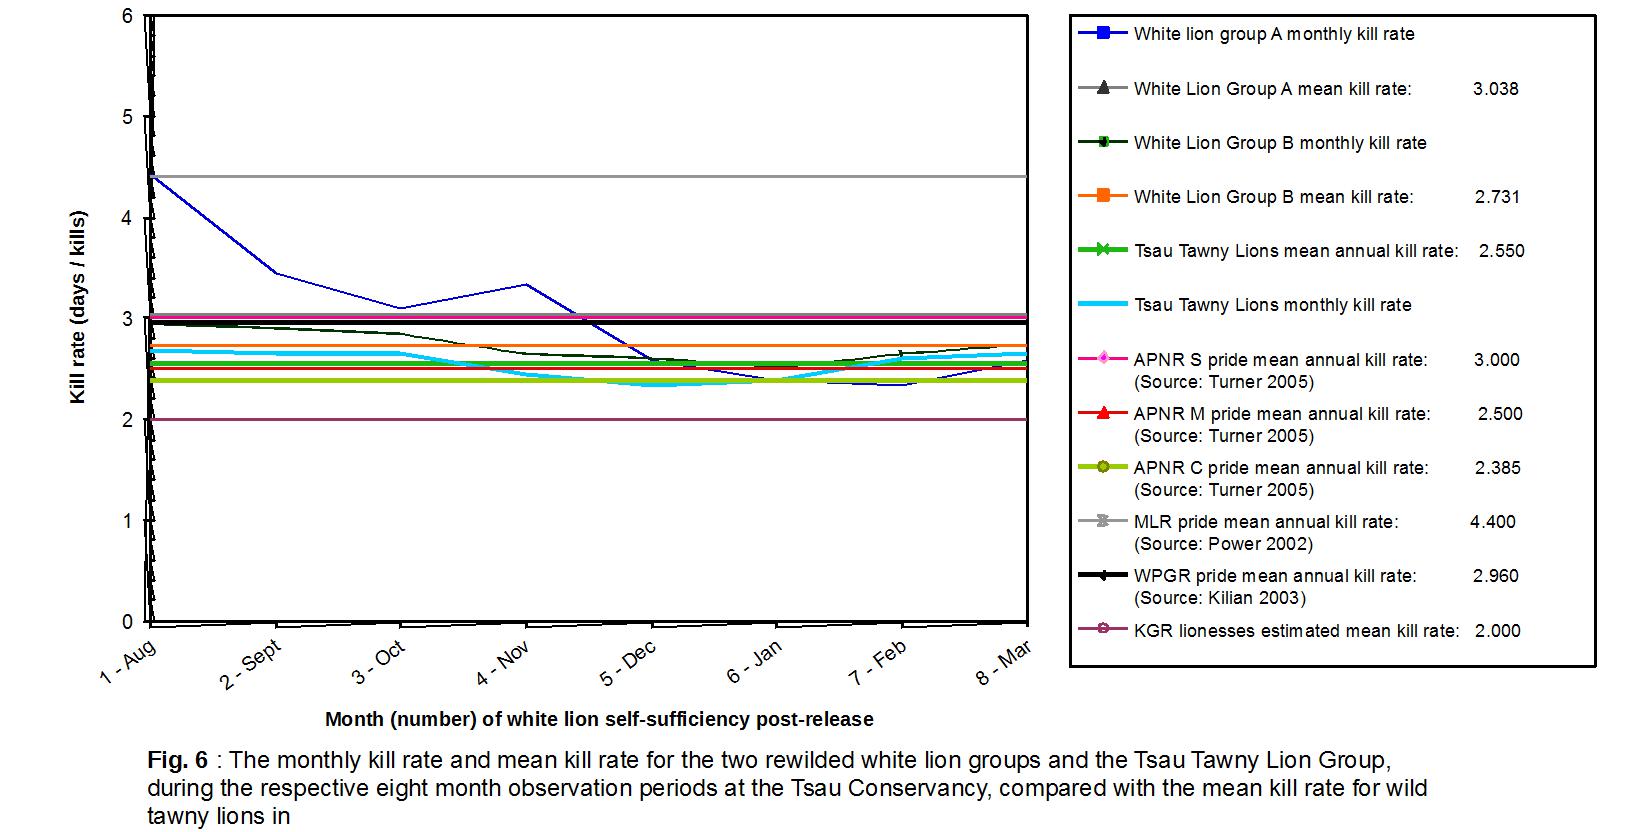 Monthly kill rate for the two rewilded white lion groups and the Tsau Tawny Lion Group compared with the rate for wild tawny lions